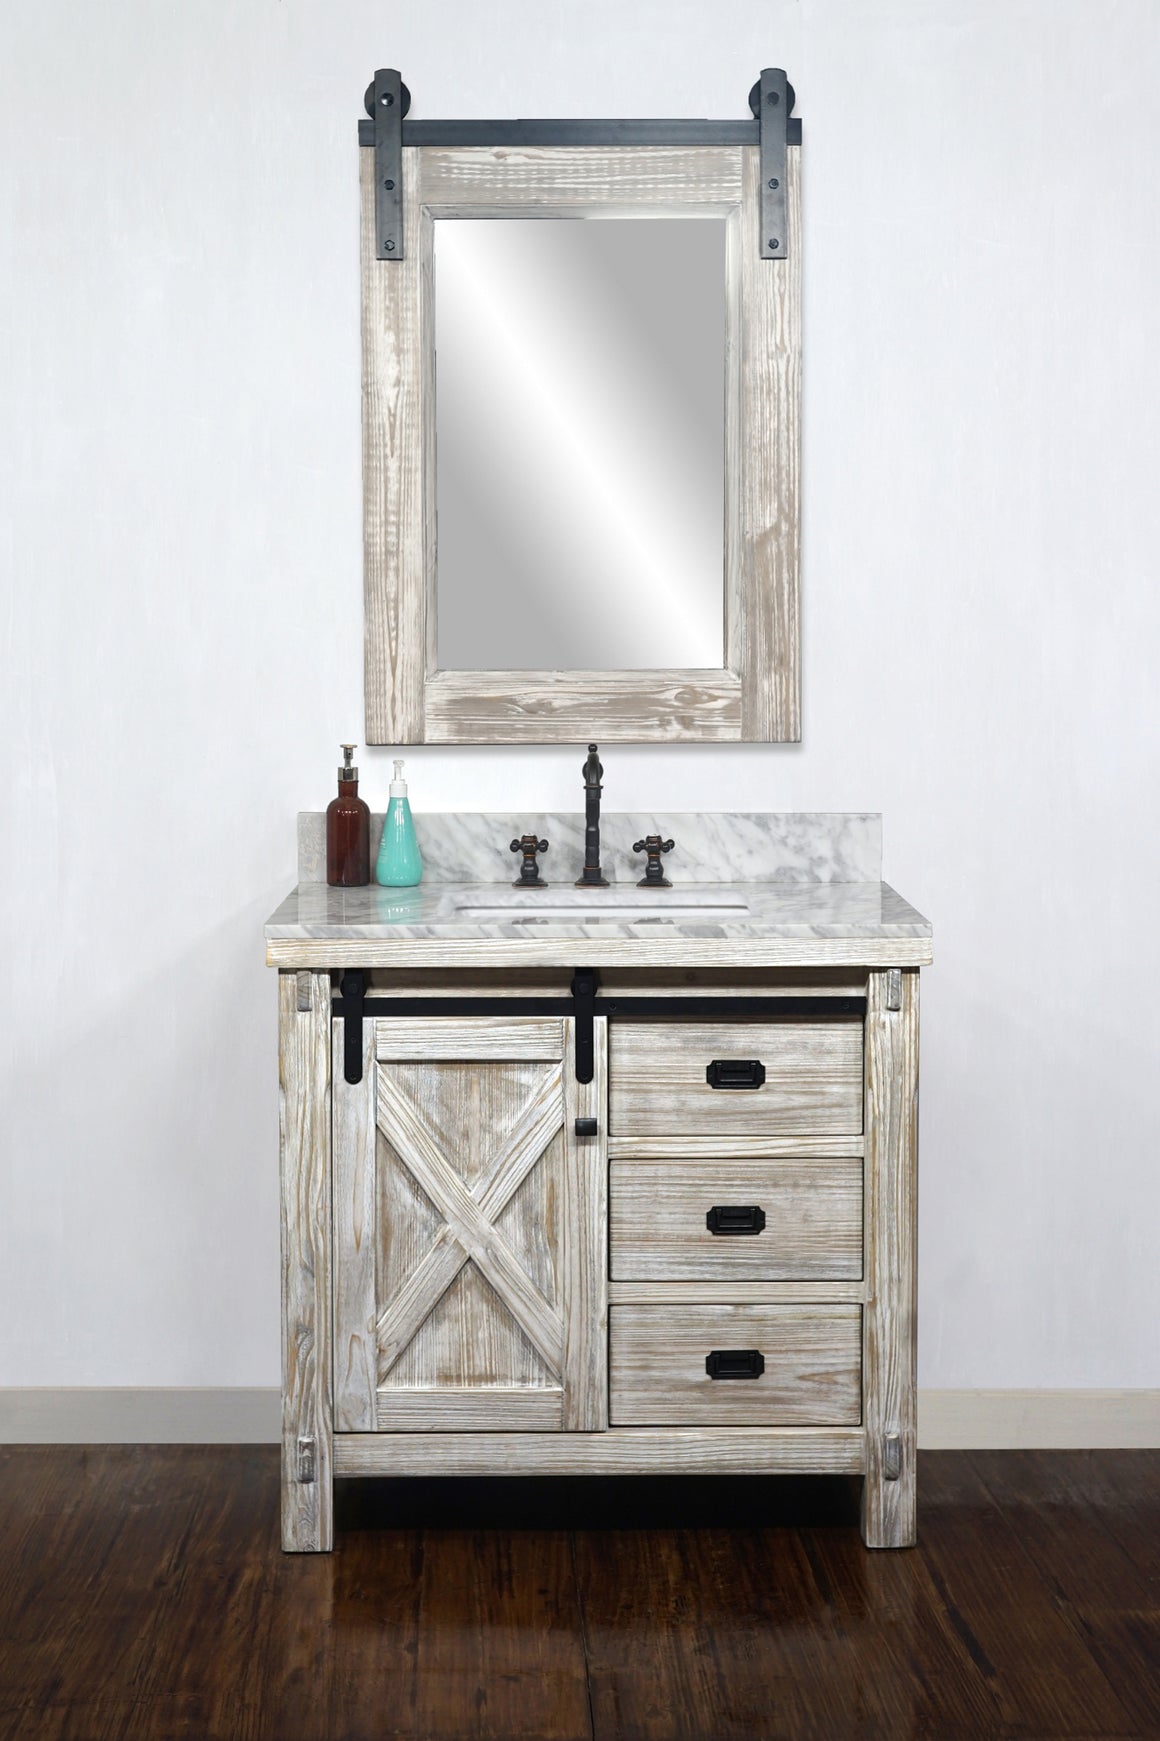 36"RUSTIC SOLID FIR BARN DOOR STYLE SINGLE SINK VANITY IN WHITE WASH WITH CARRARA WHITE MARBLE TOP WITH RECTANGULAR SINK-NO FAUCET